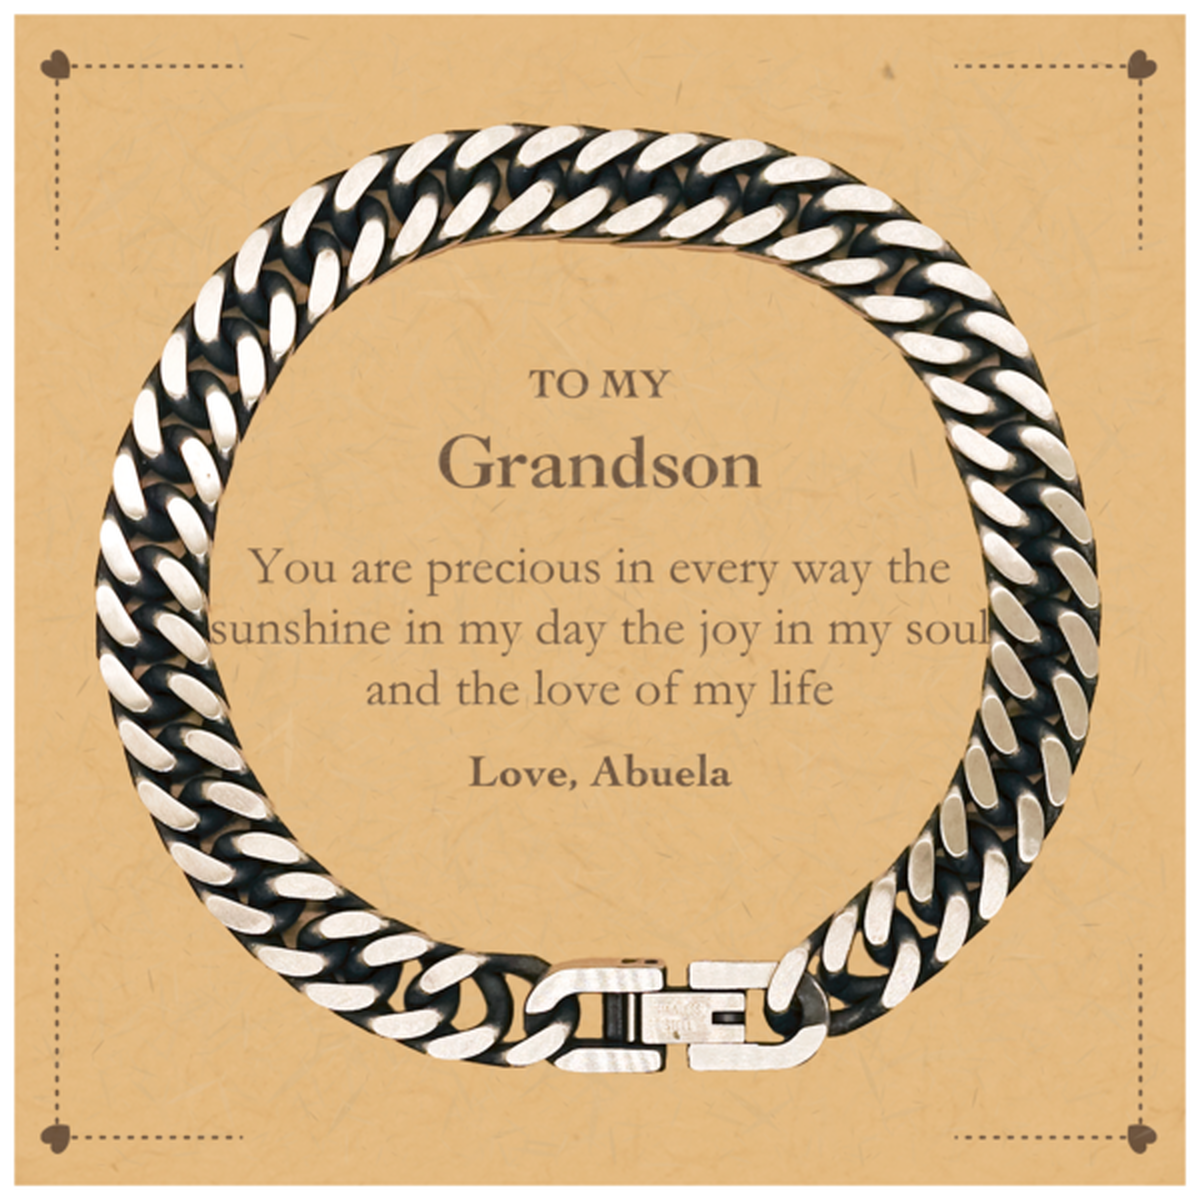 Graduation Gifts for Grandson Cuban Link Chain Bracelet Present from Abuela, Christmas Grandson Birthday Gifts Grandson You are precious in every way the sunshine in my day. Love, Abuela